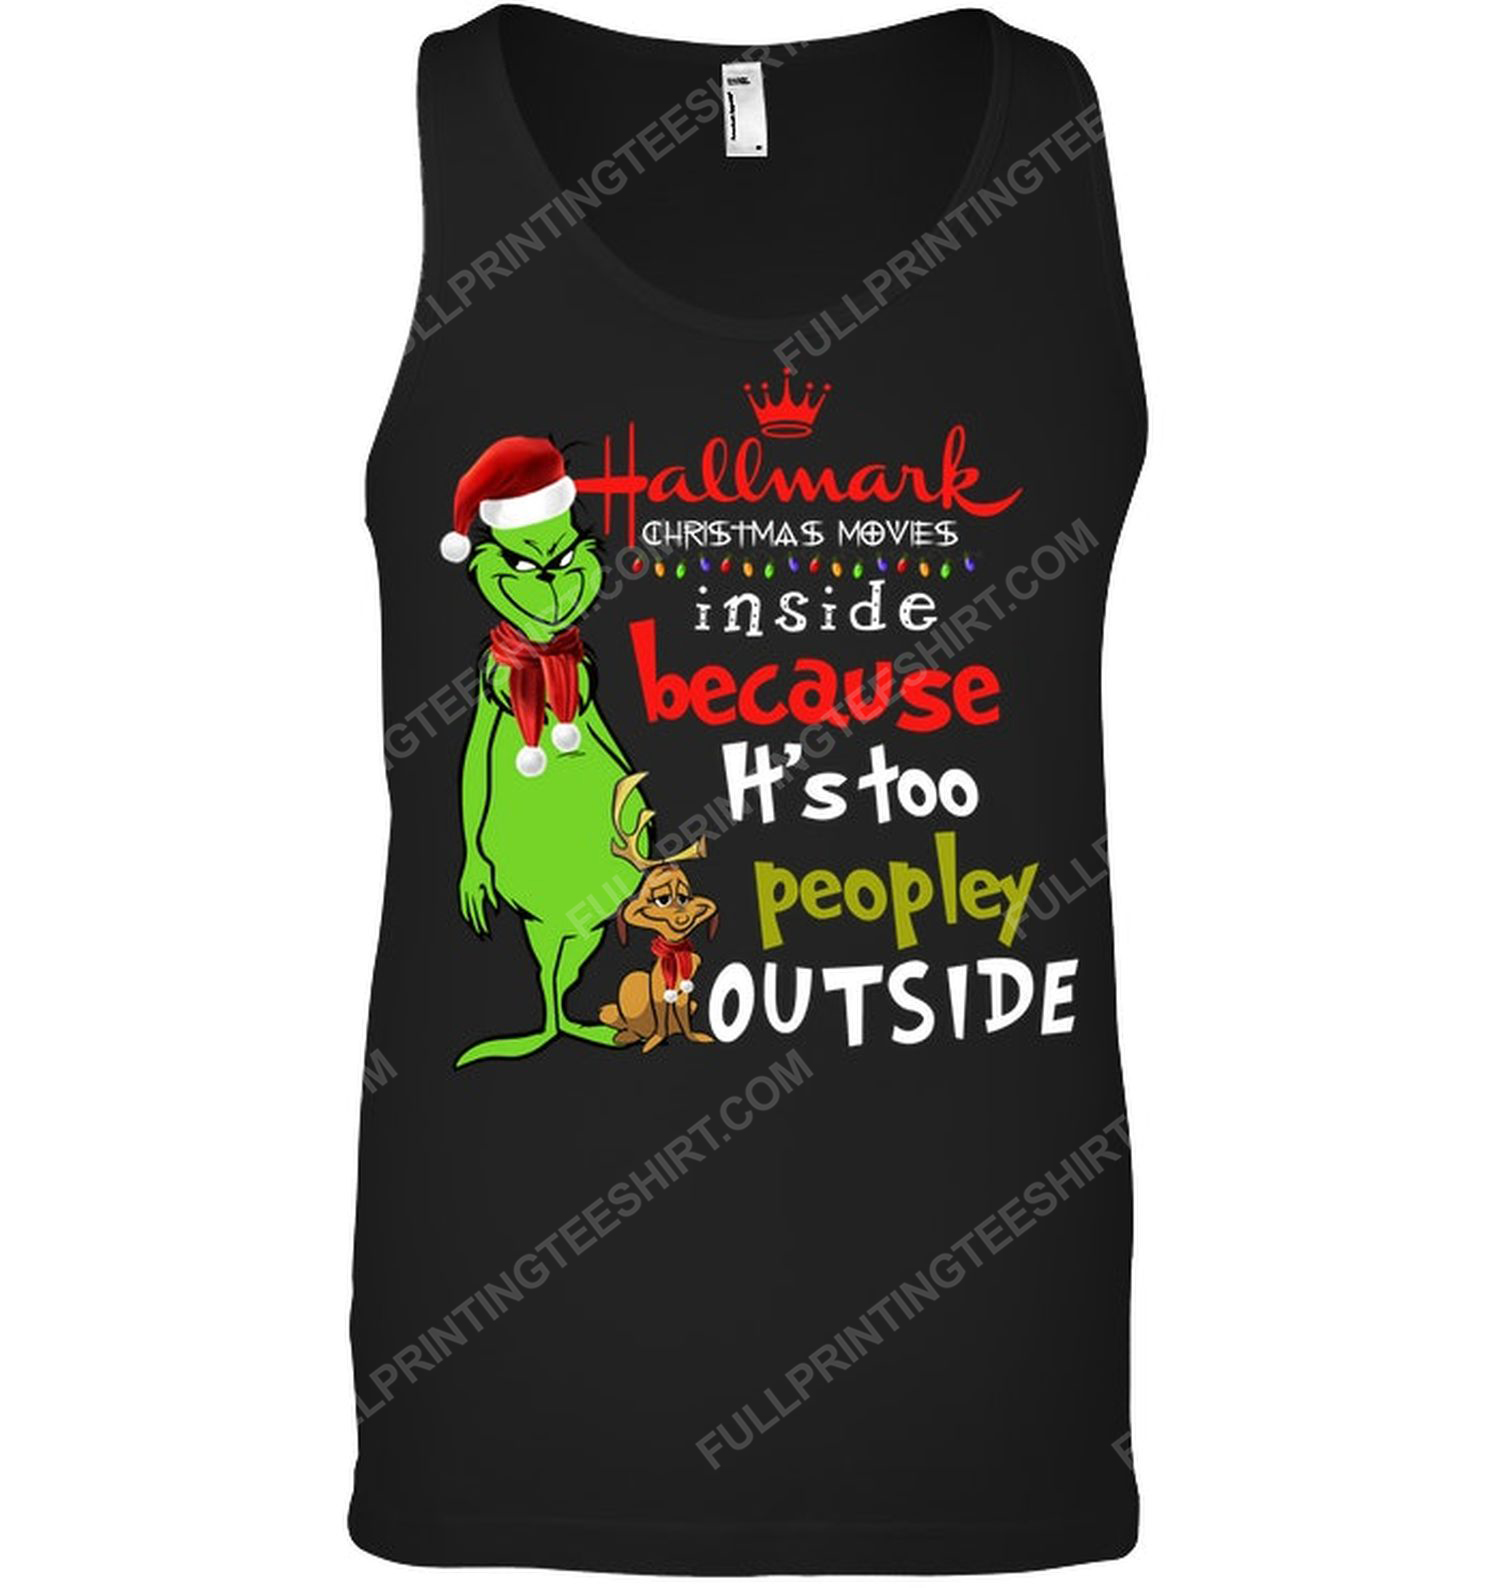 Hallmark christmas movies inside because it's too peopley outside grinch tank top